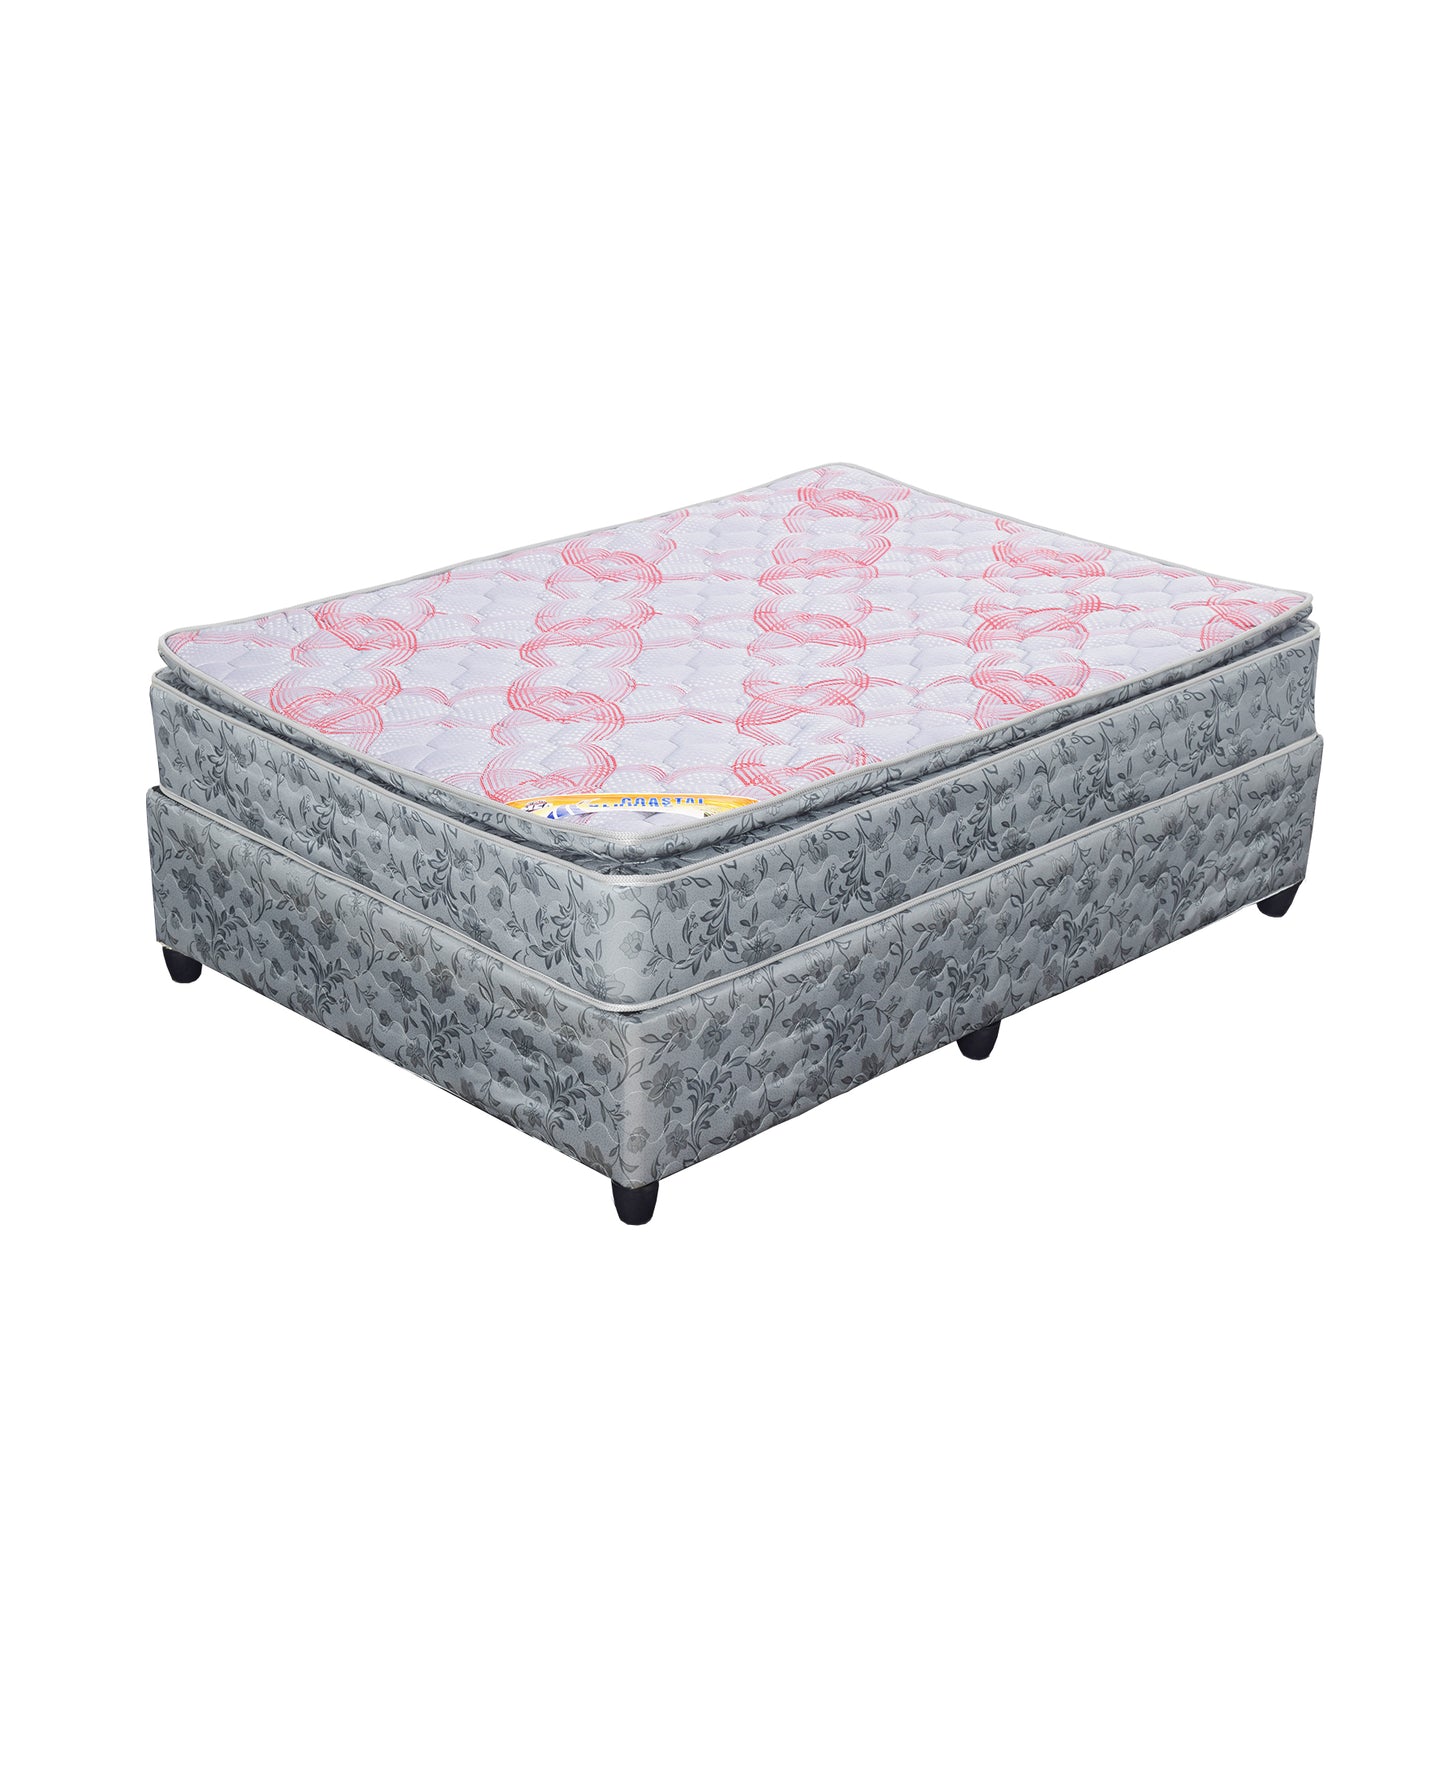 Coastal 1 Sided Pillowtop Double Bed